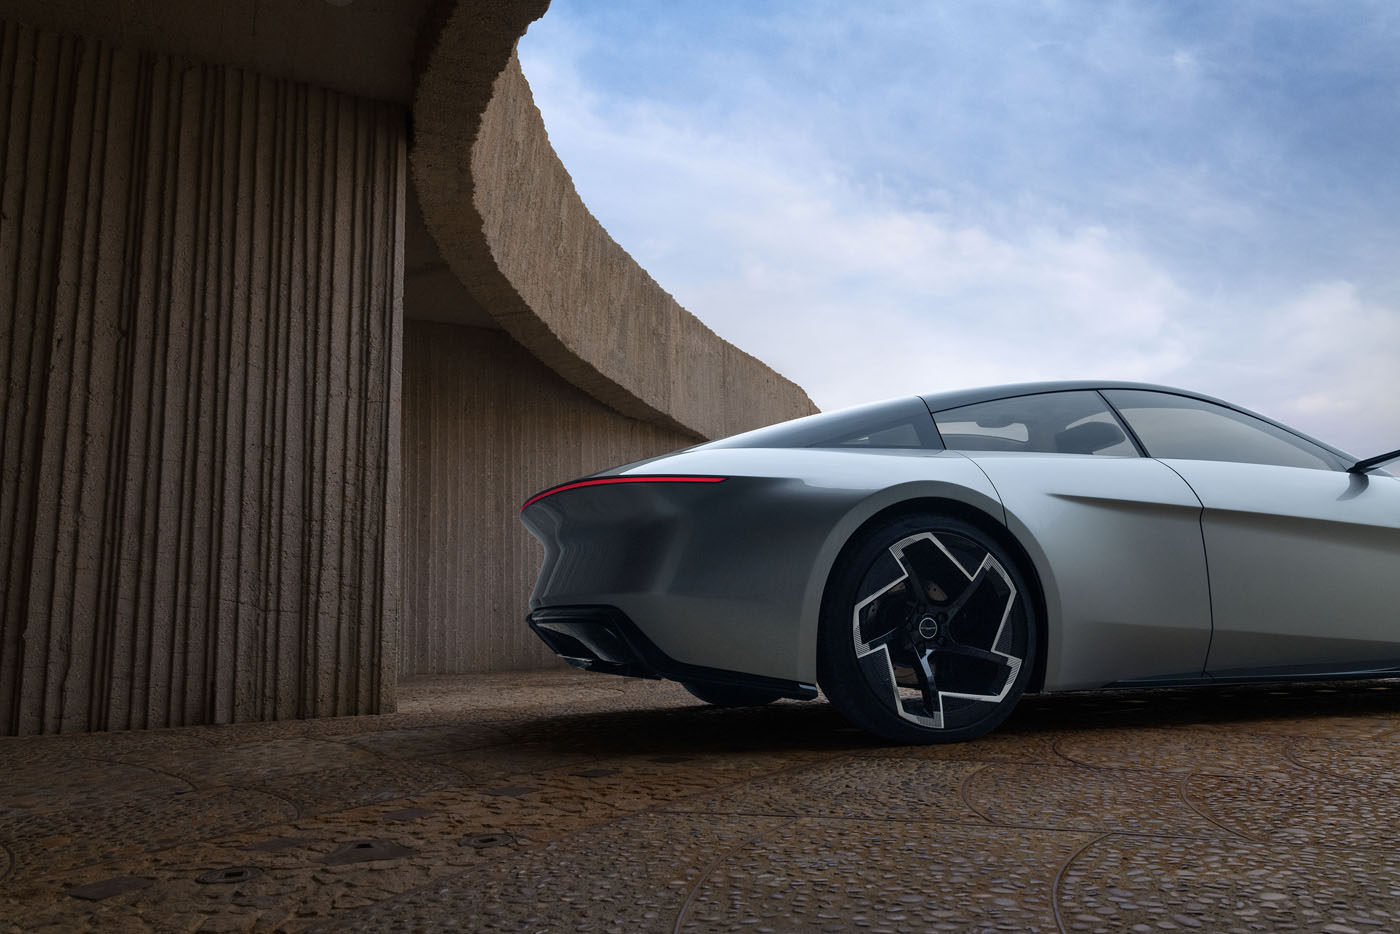 The Chrysler Halcyon Concept’s lightweight, machine faced 22 i